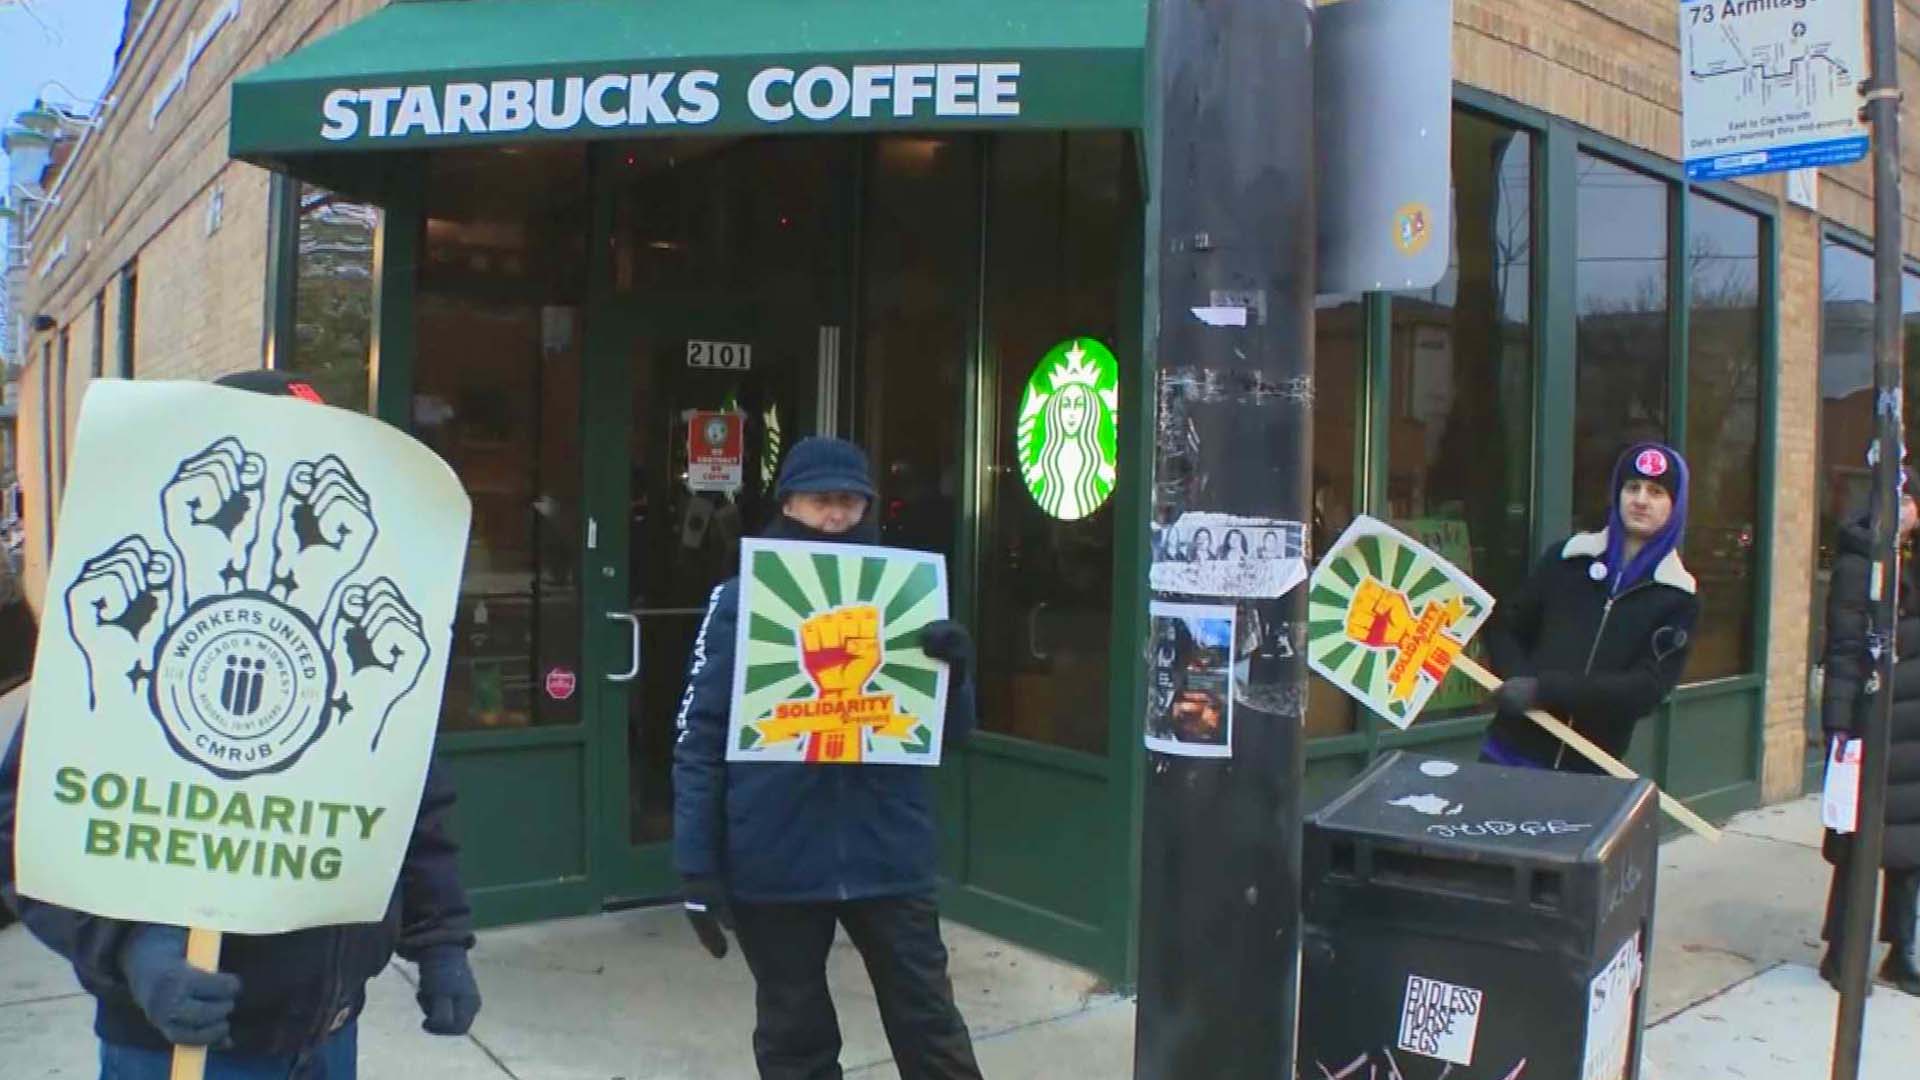 Starbucks Closed Stores to Bust Unions: National Labor Relations